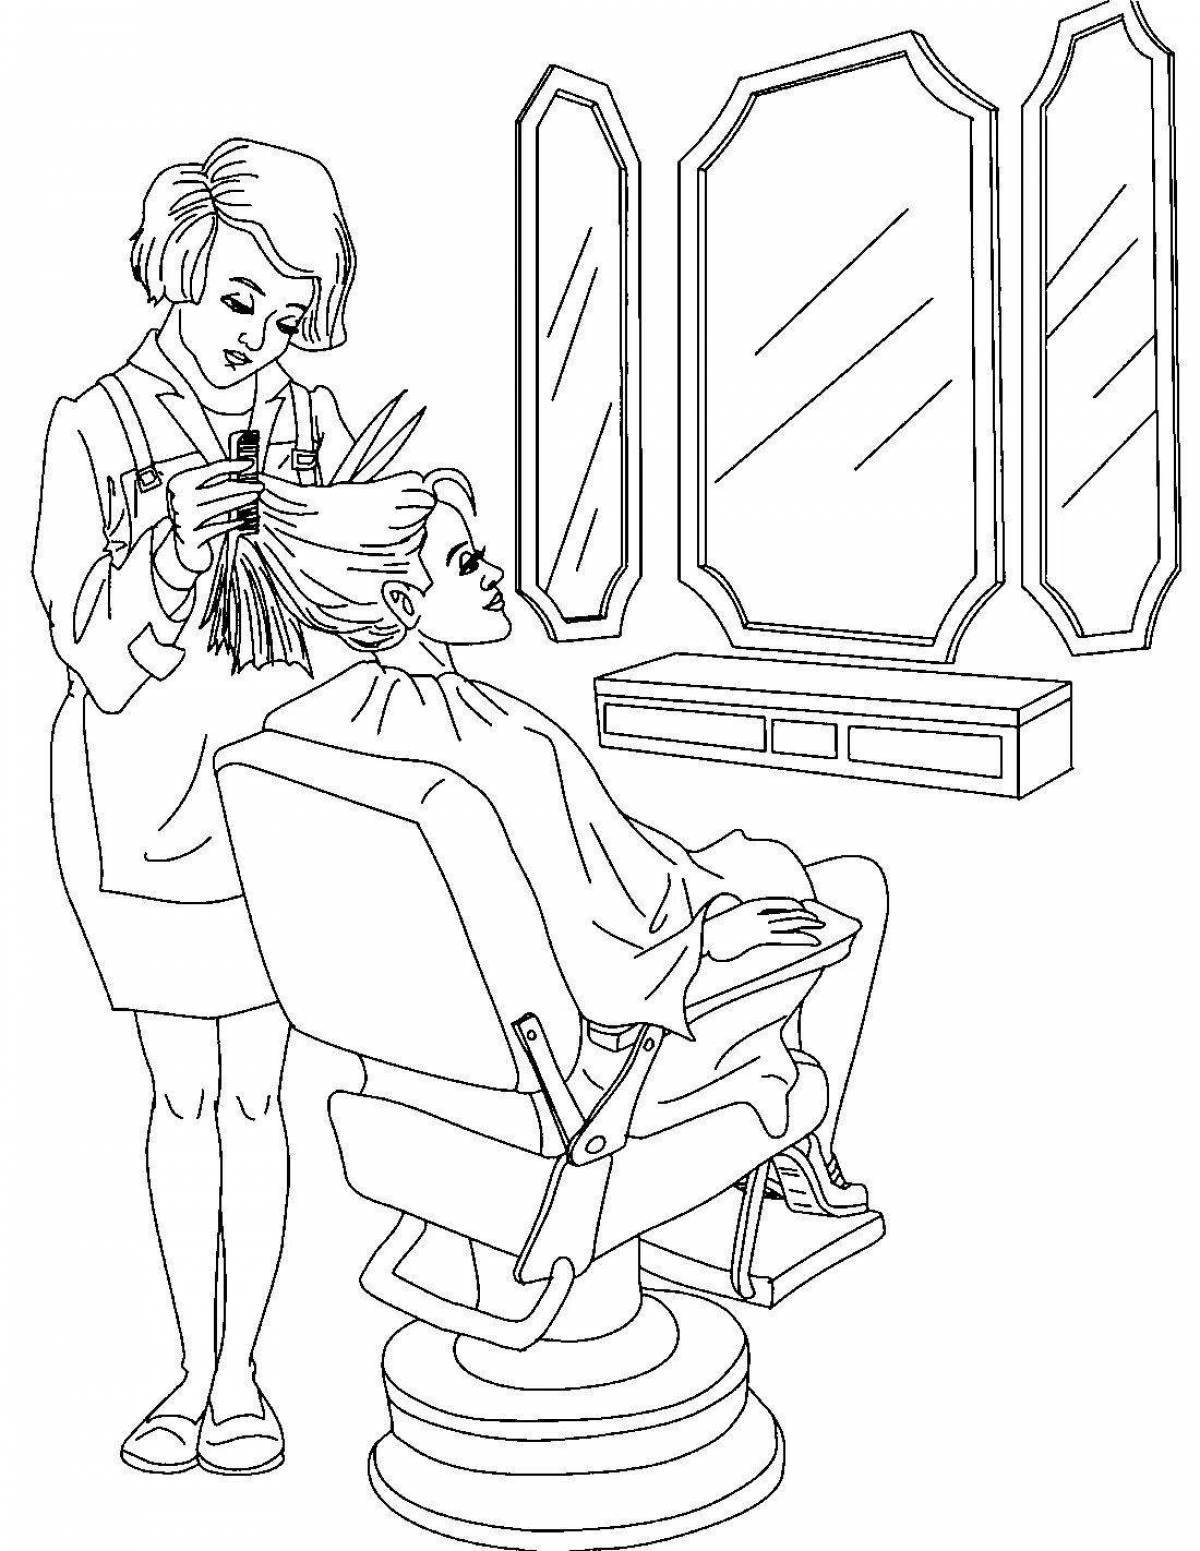 Coloring page happy hairdresser